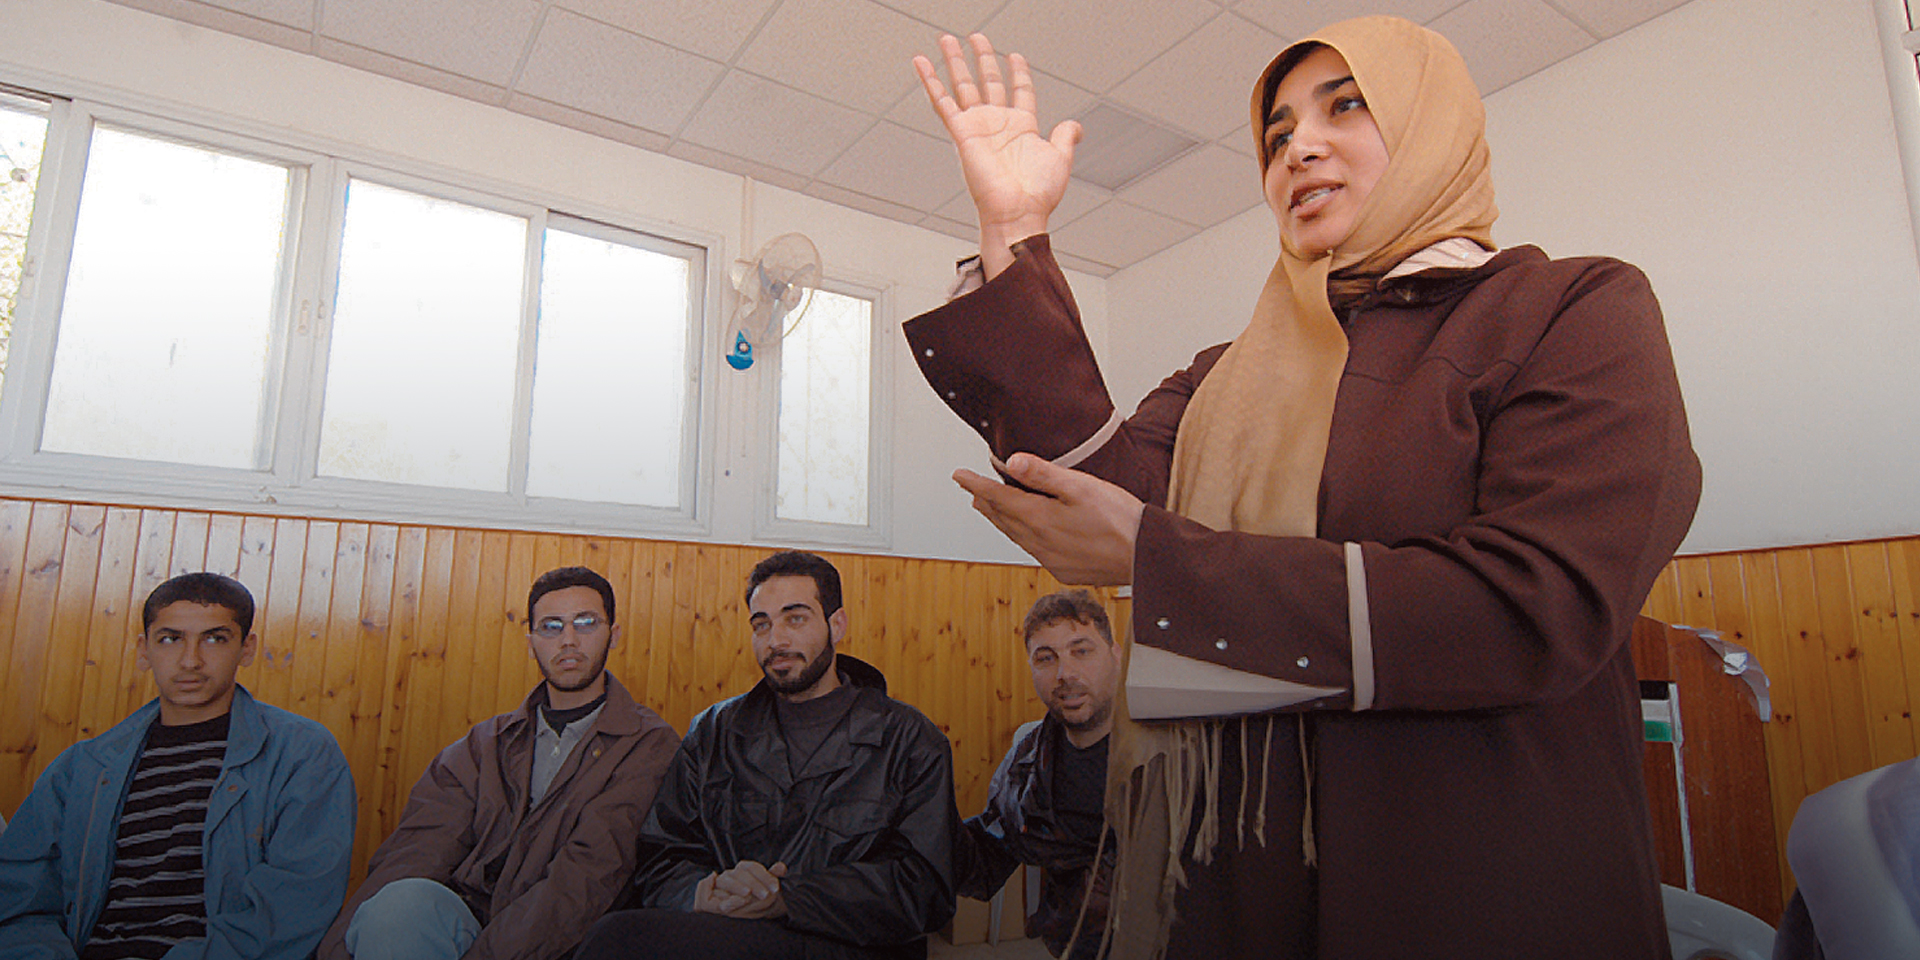 A woman stands and communicates with sign language as several men sit and watch in the background.